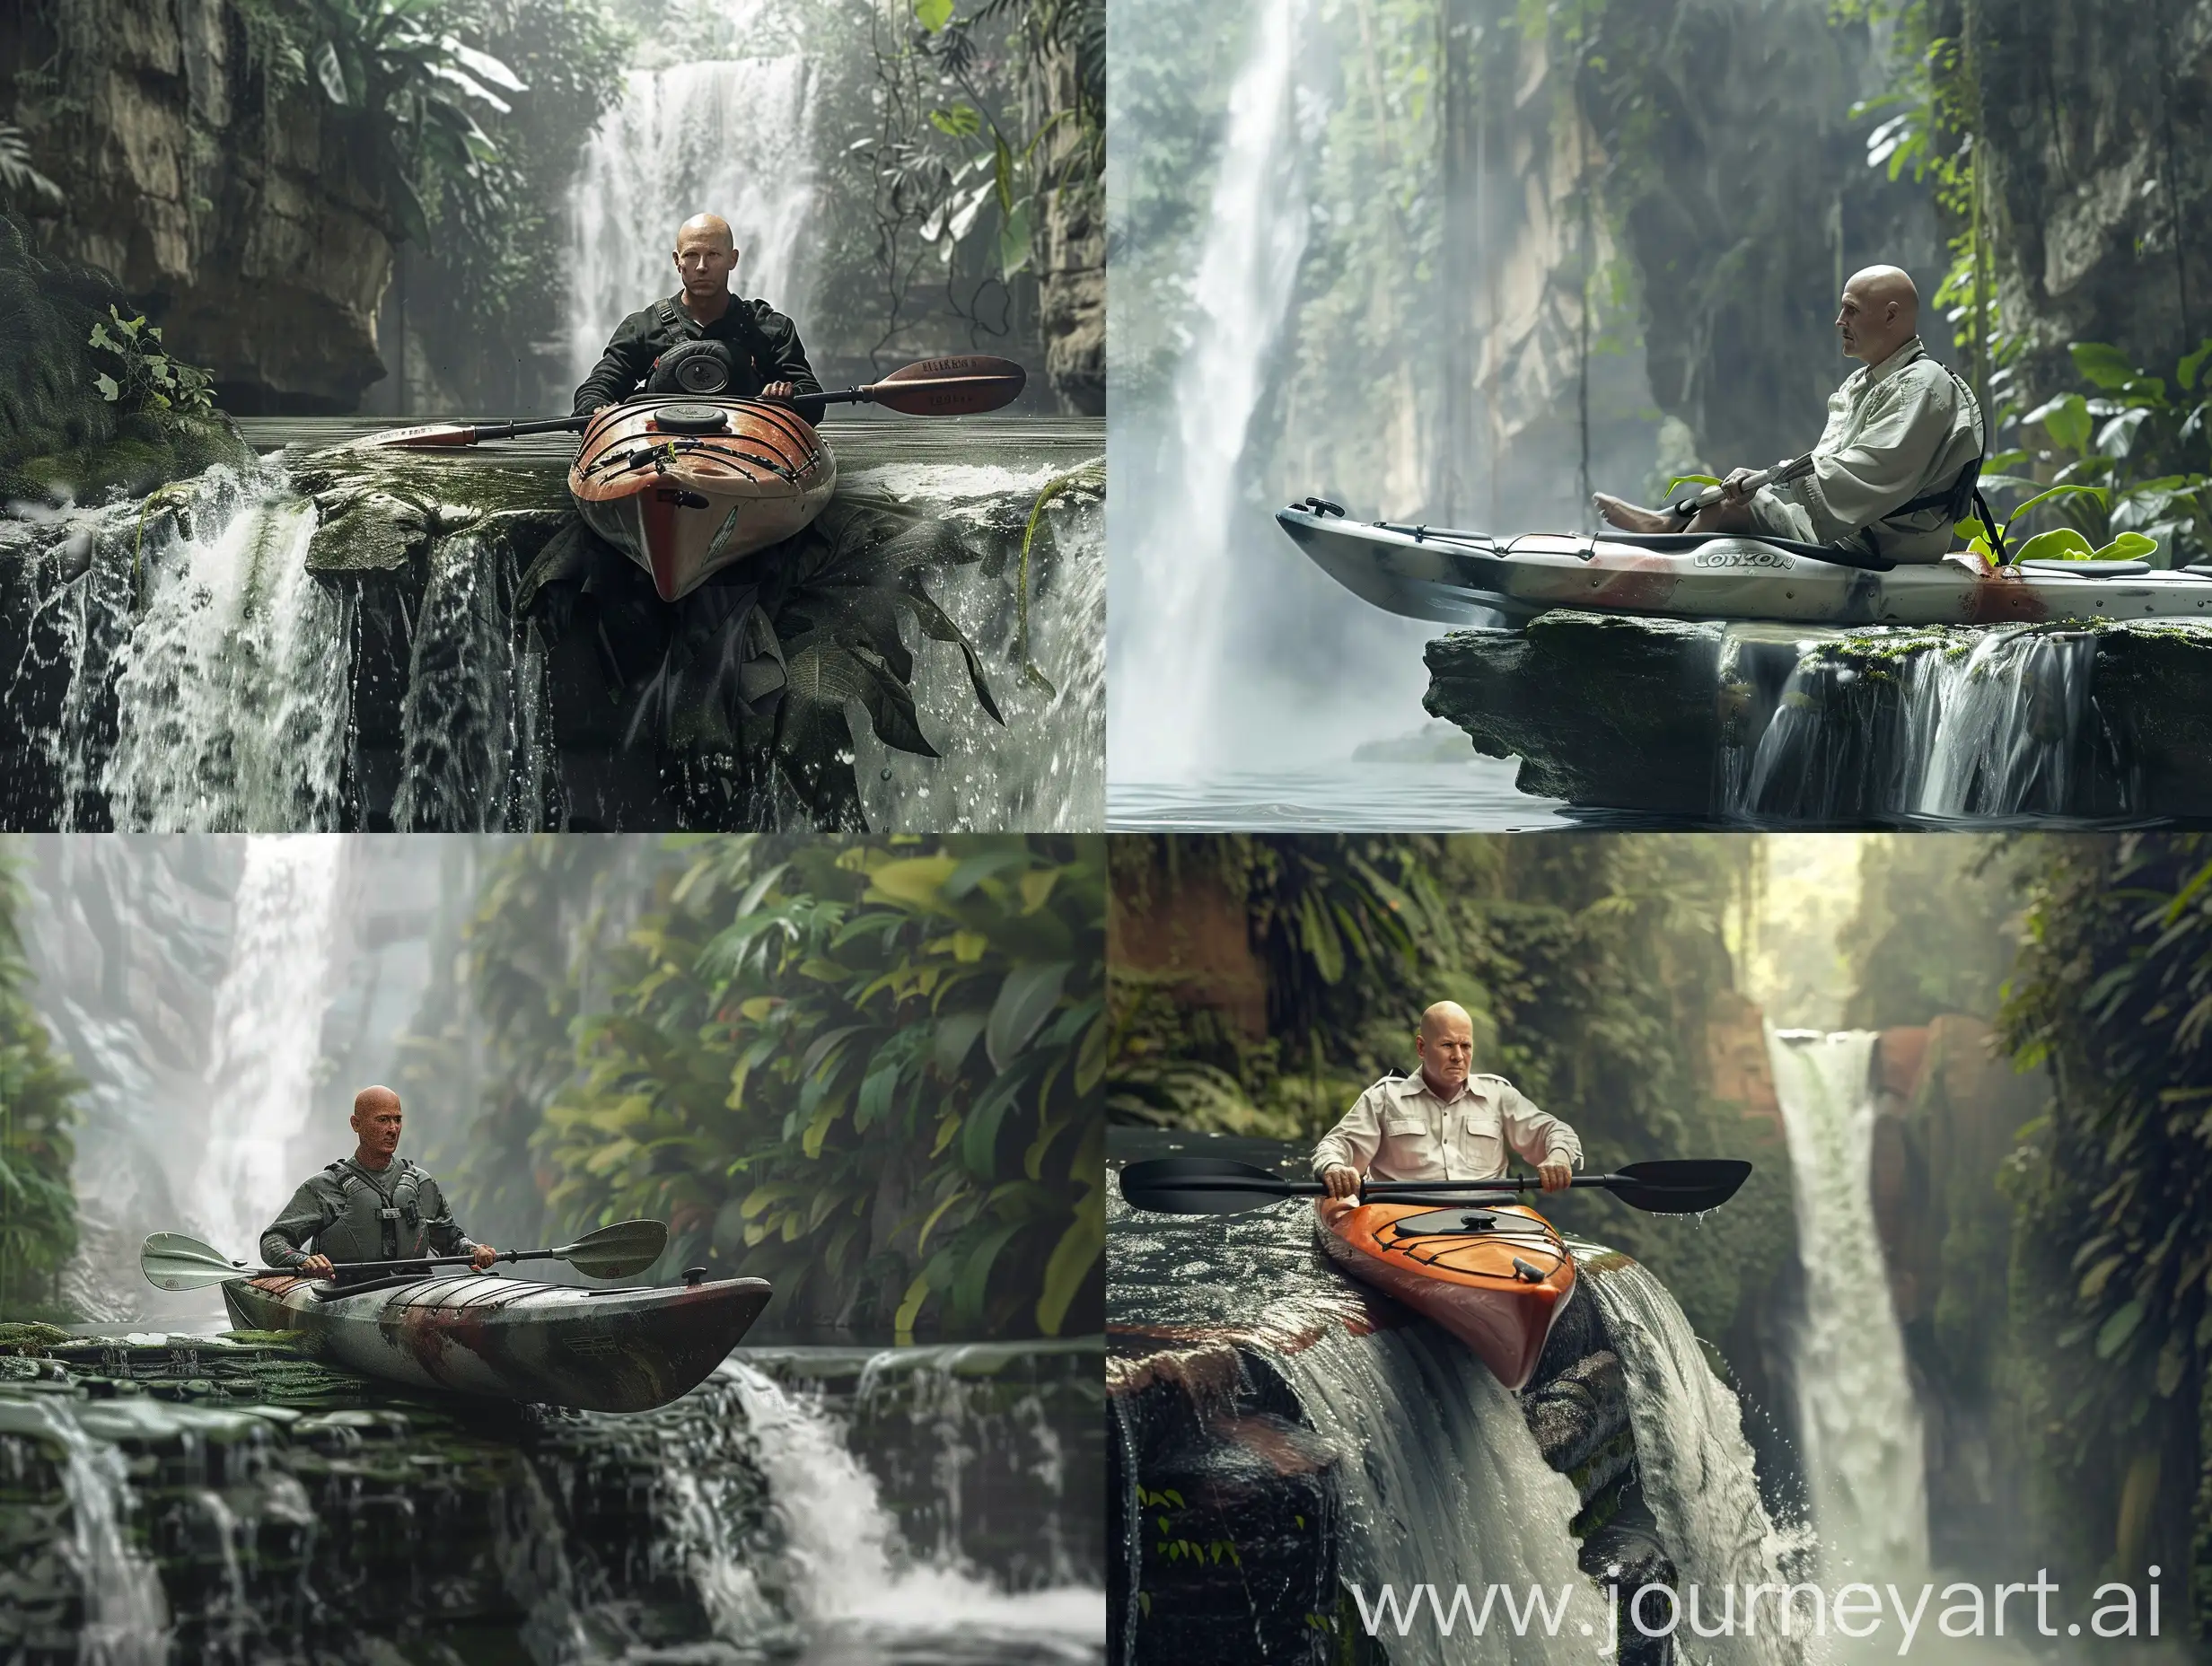 Courageous-Kayaker-Confronting-Waterfall-Abyss